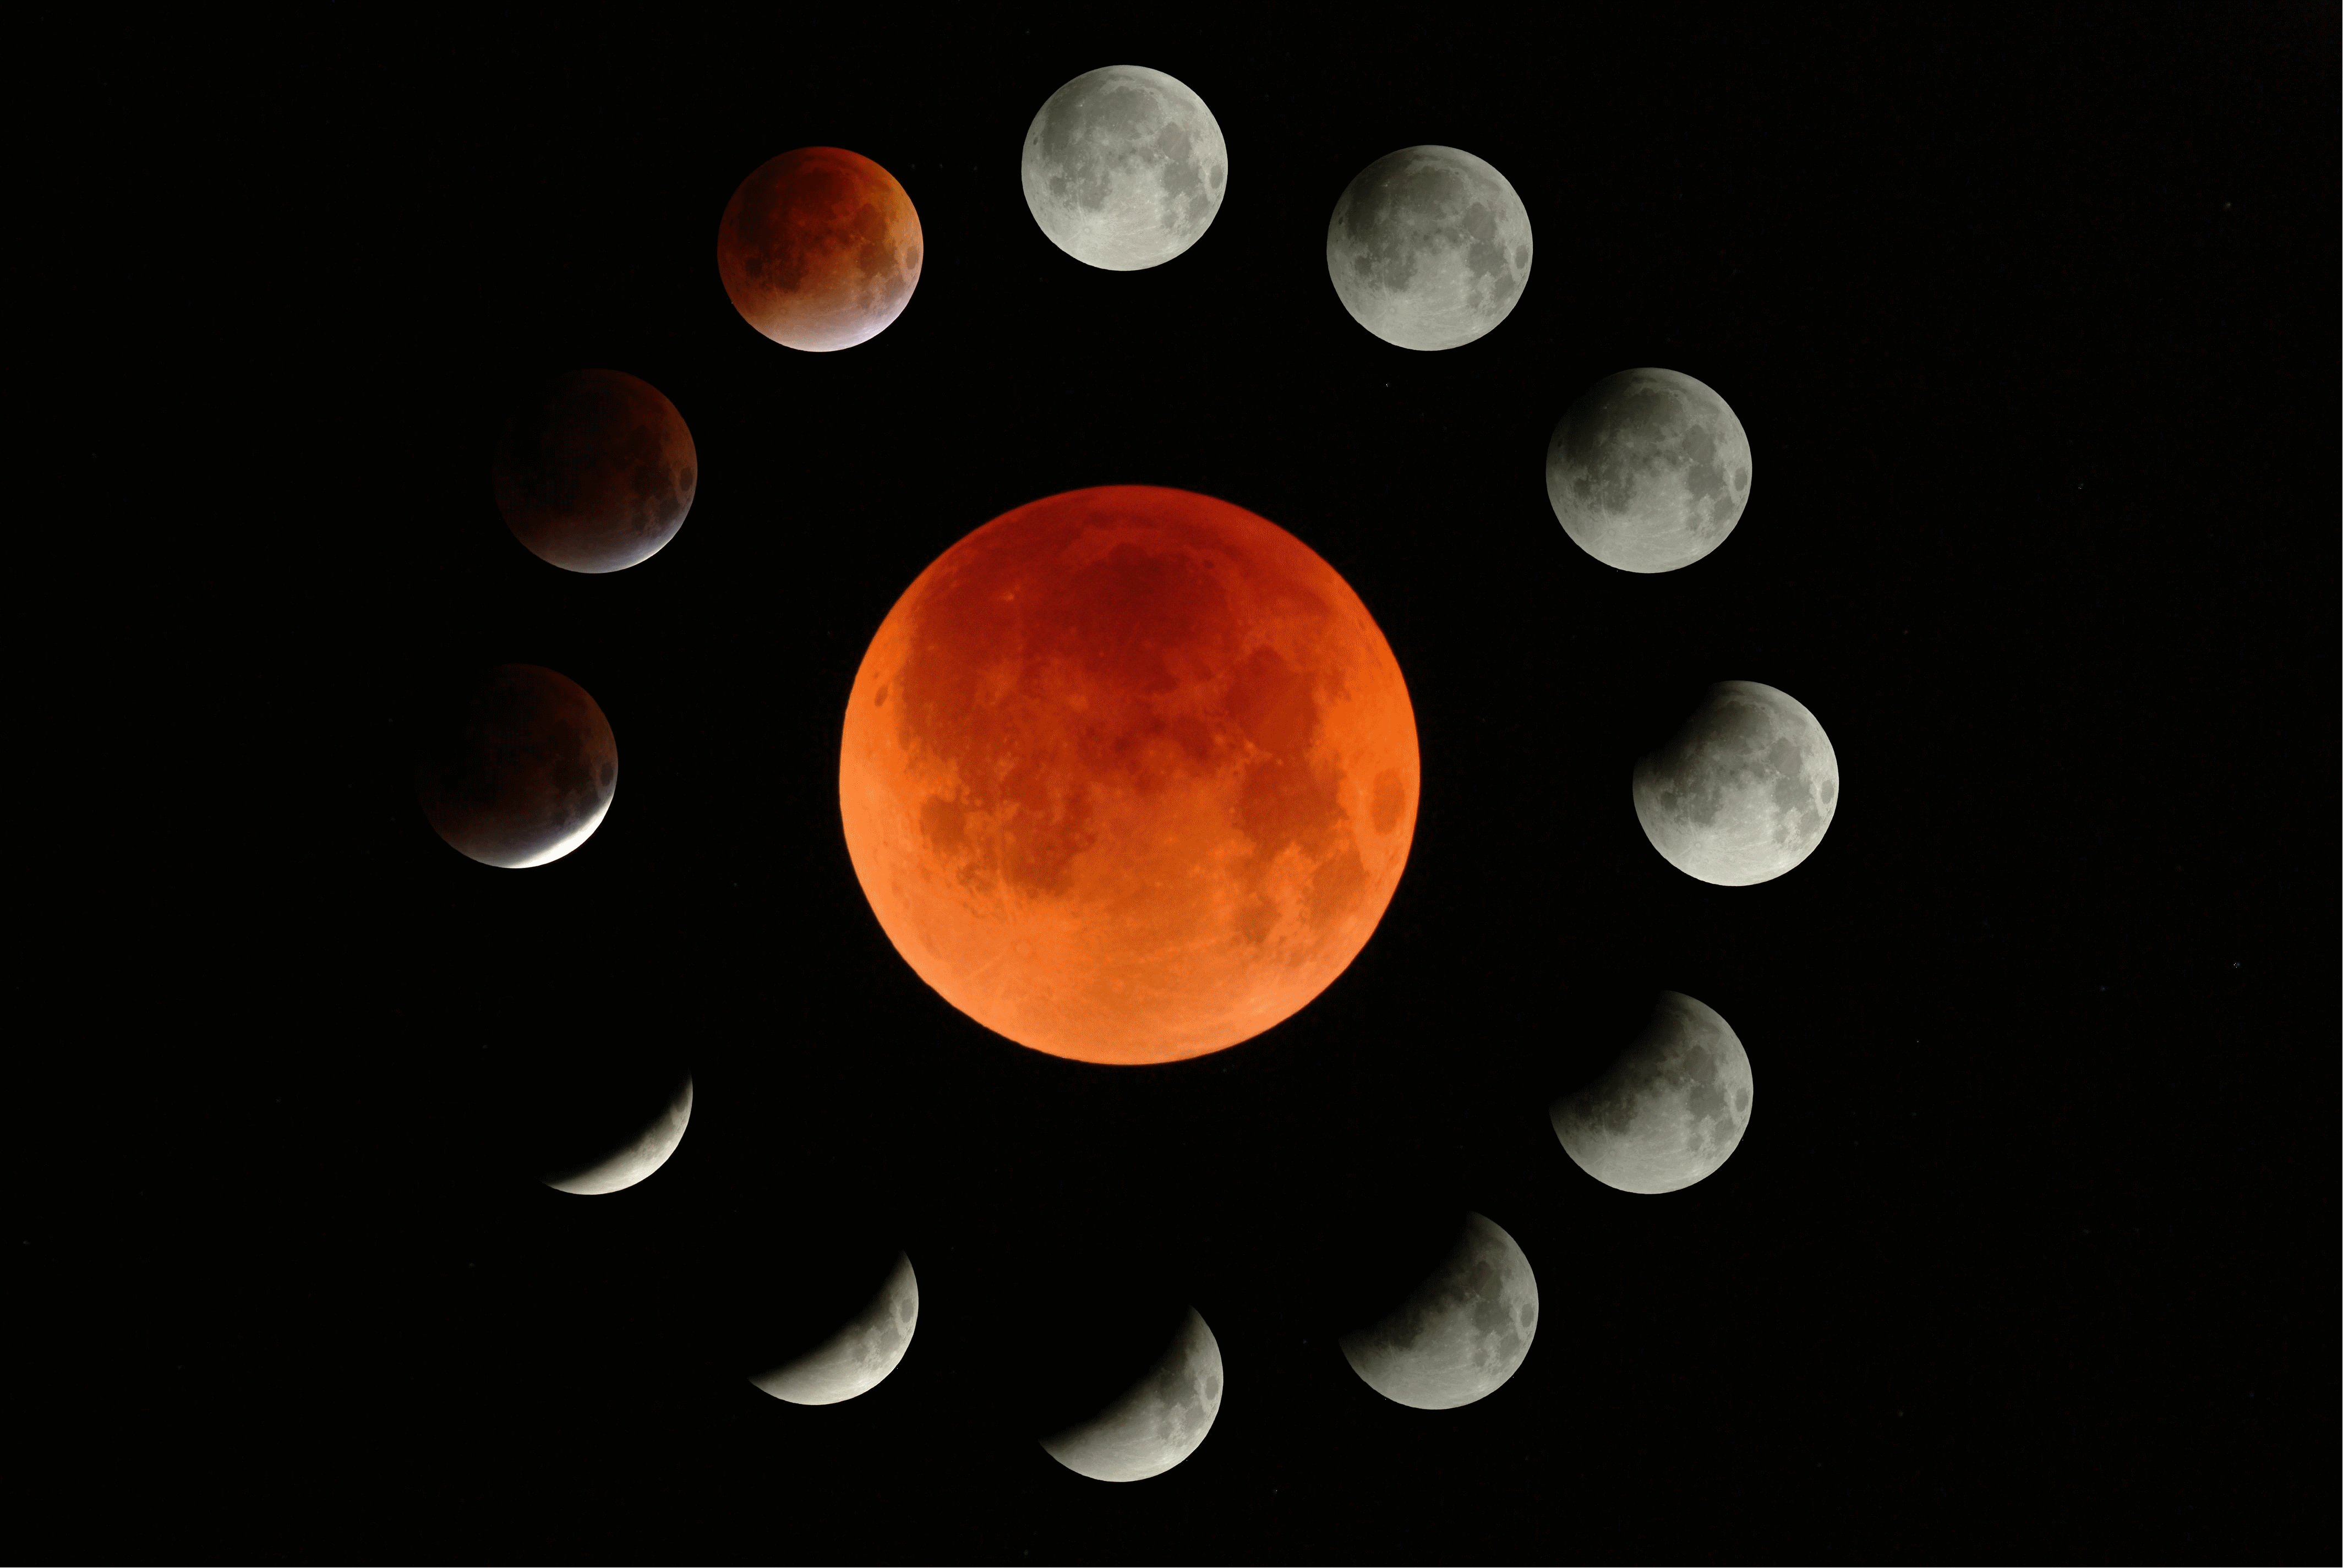 Total Lunar Eclipse by Michael B. in Portland, Oregon, with Orion ED 80 80mm f/7.5 Apochromatic Refractor Telescope.